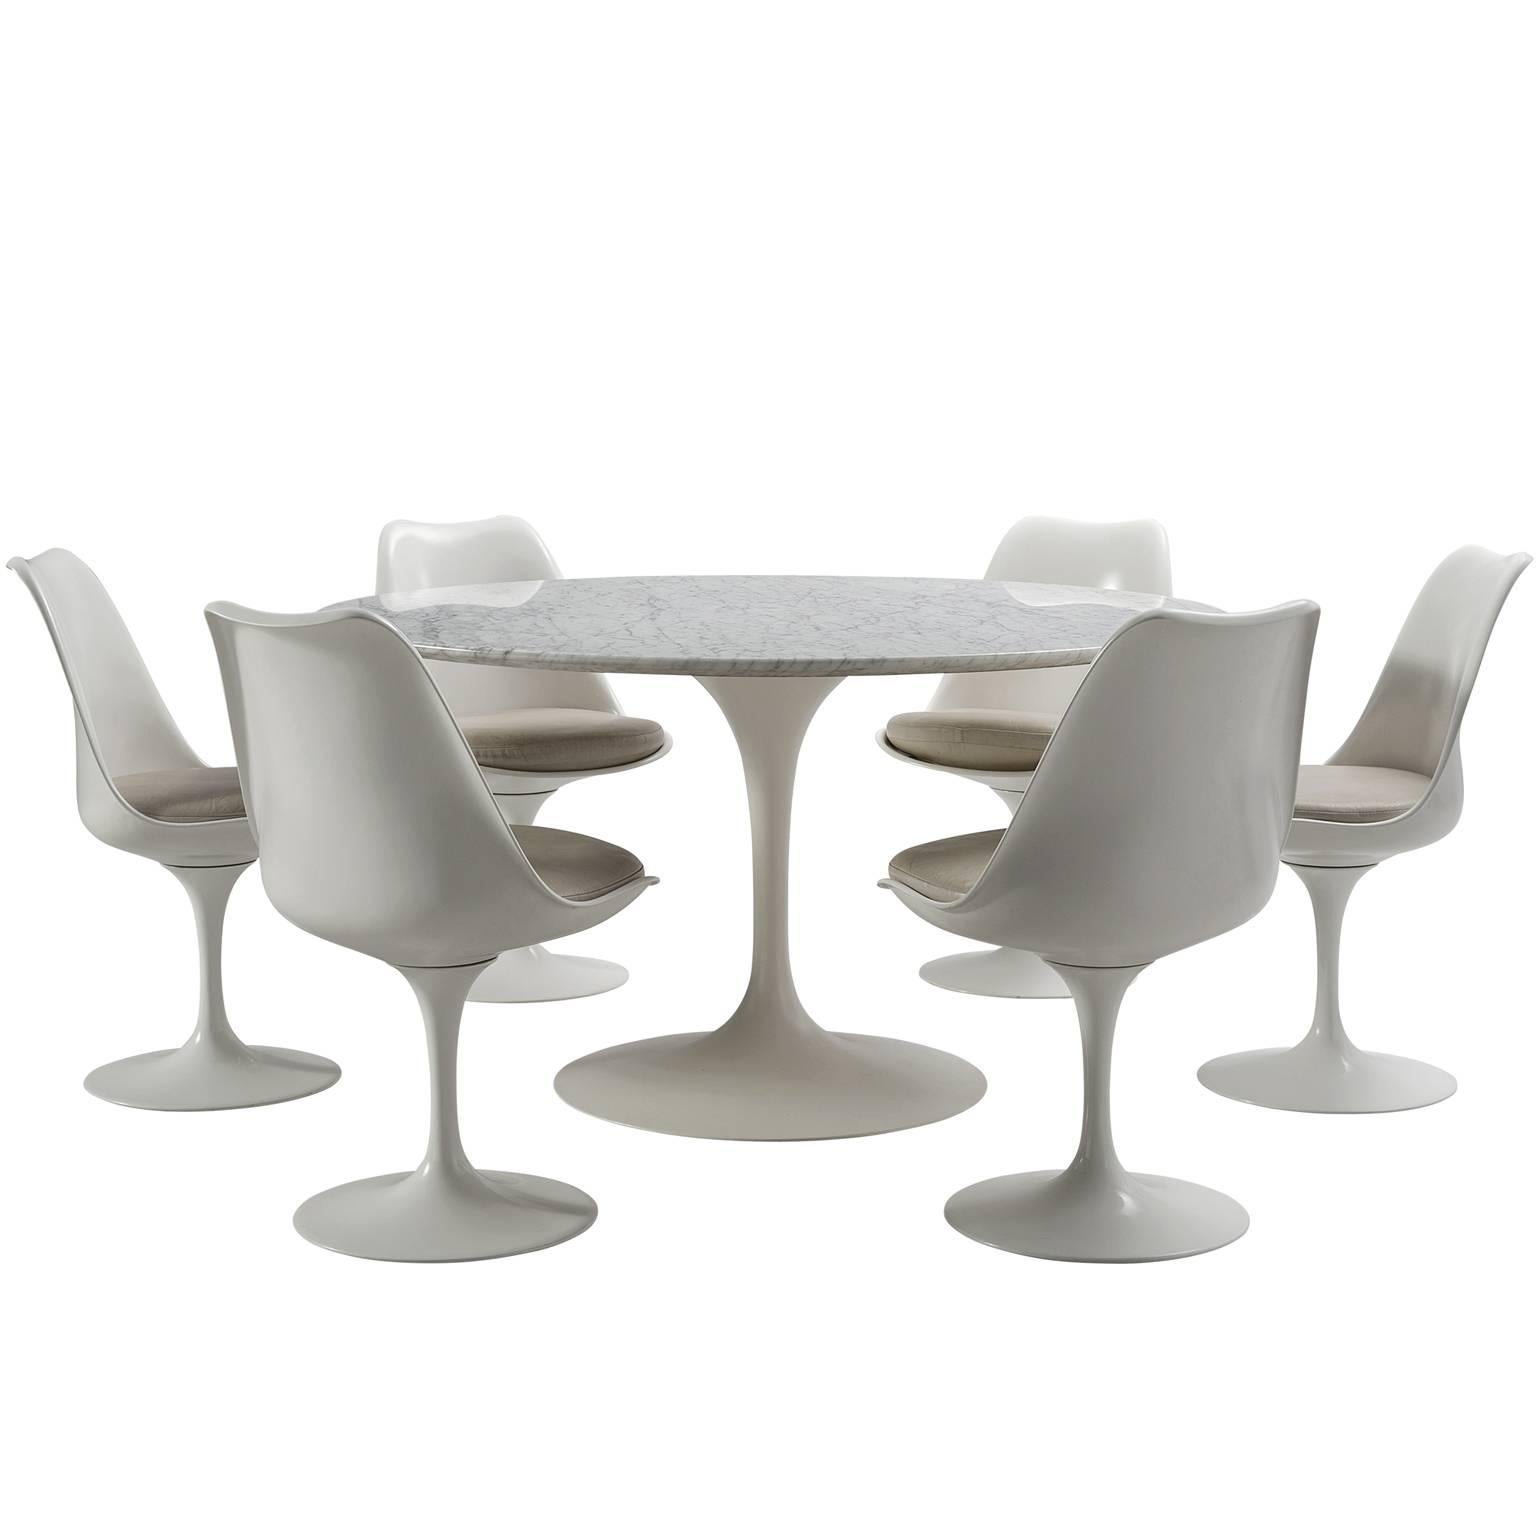 Luxurious Eero Saarinen Tulip Dining Set with in Leather and Marble